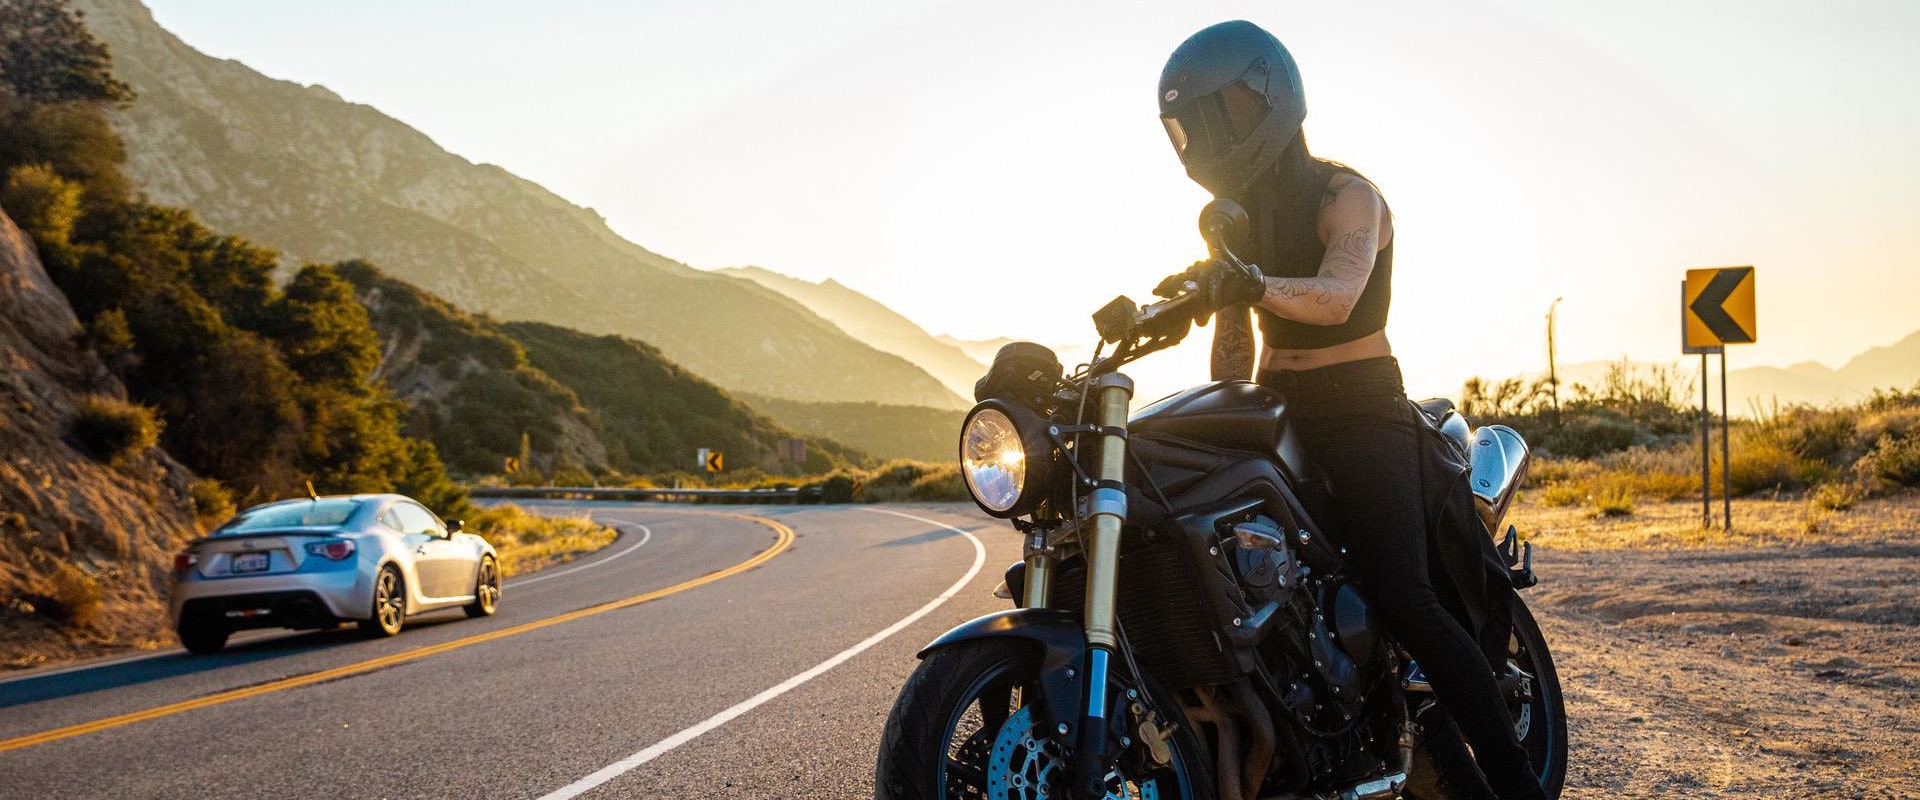 Is Motorcycle Insurance Cheaper Than Car Insurance? - A Comprehensive Guide